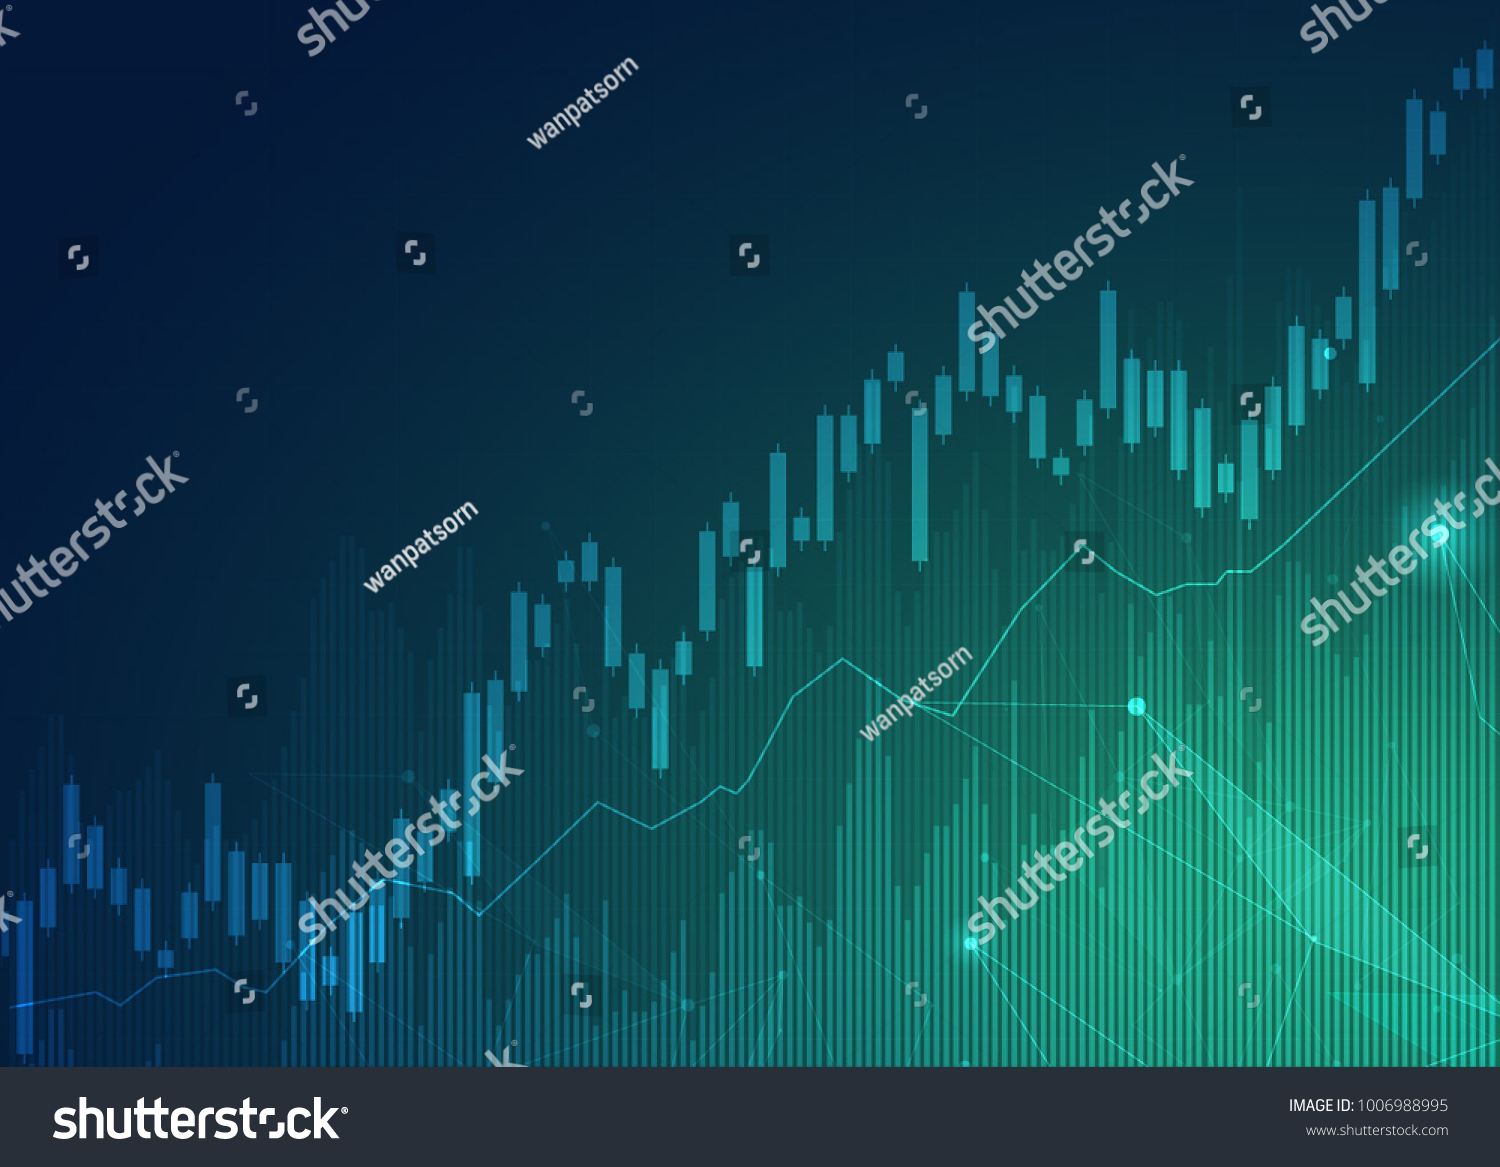 SVG of Business candle stick graph chart of stock market investment trading, Bullish point, Bearish point. trend of graph vector design. svg